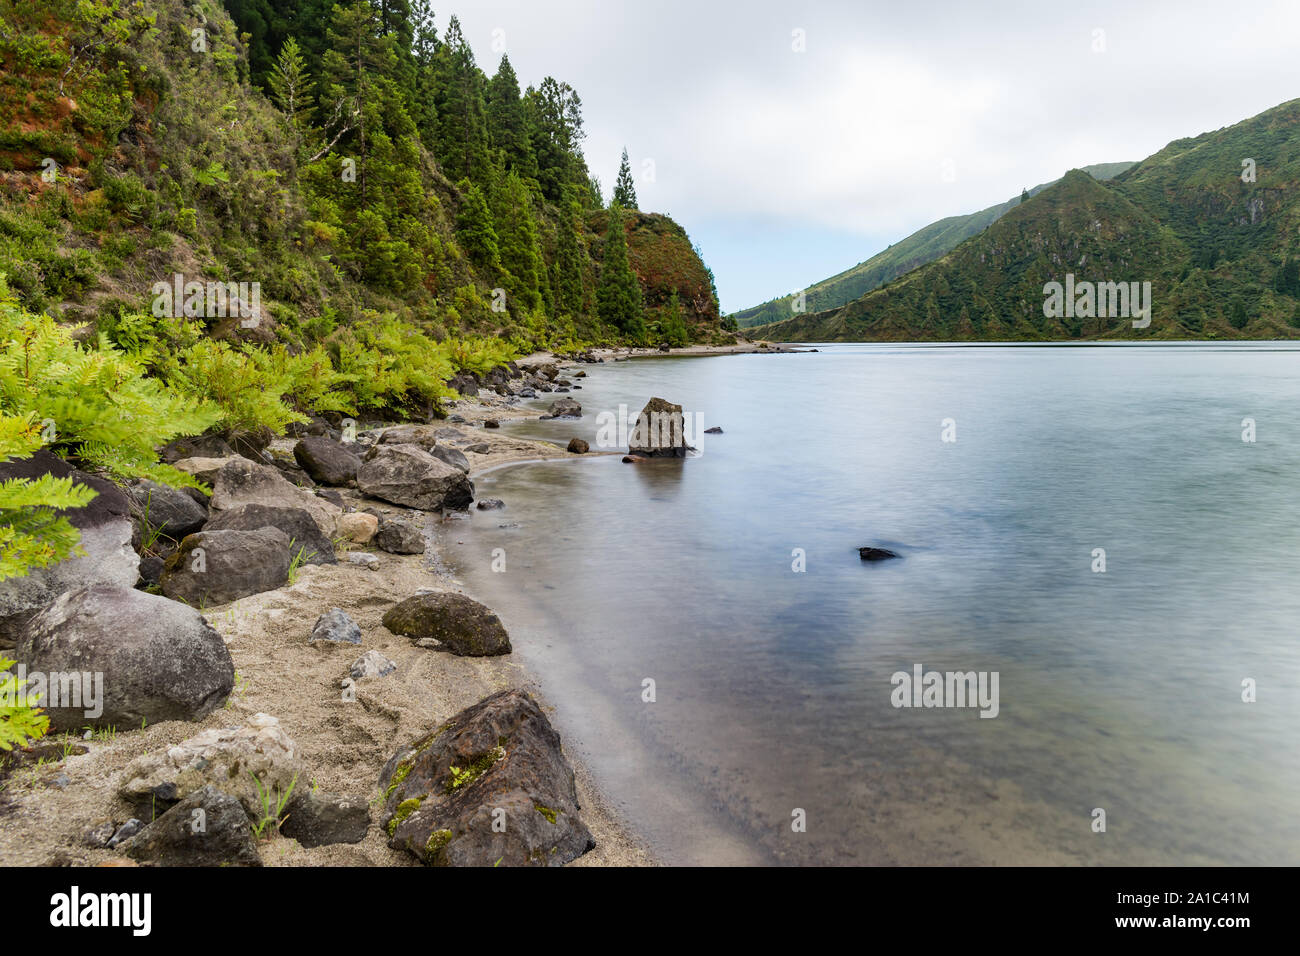 View from the waterside of Lagoa do Fogo, a crater lake on the island of São Miguel in the Azores archipelago.  Long exposure image. Stock Photo